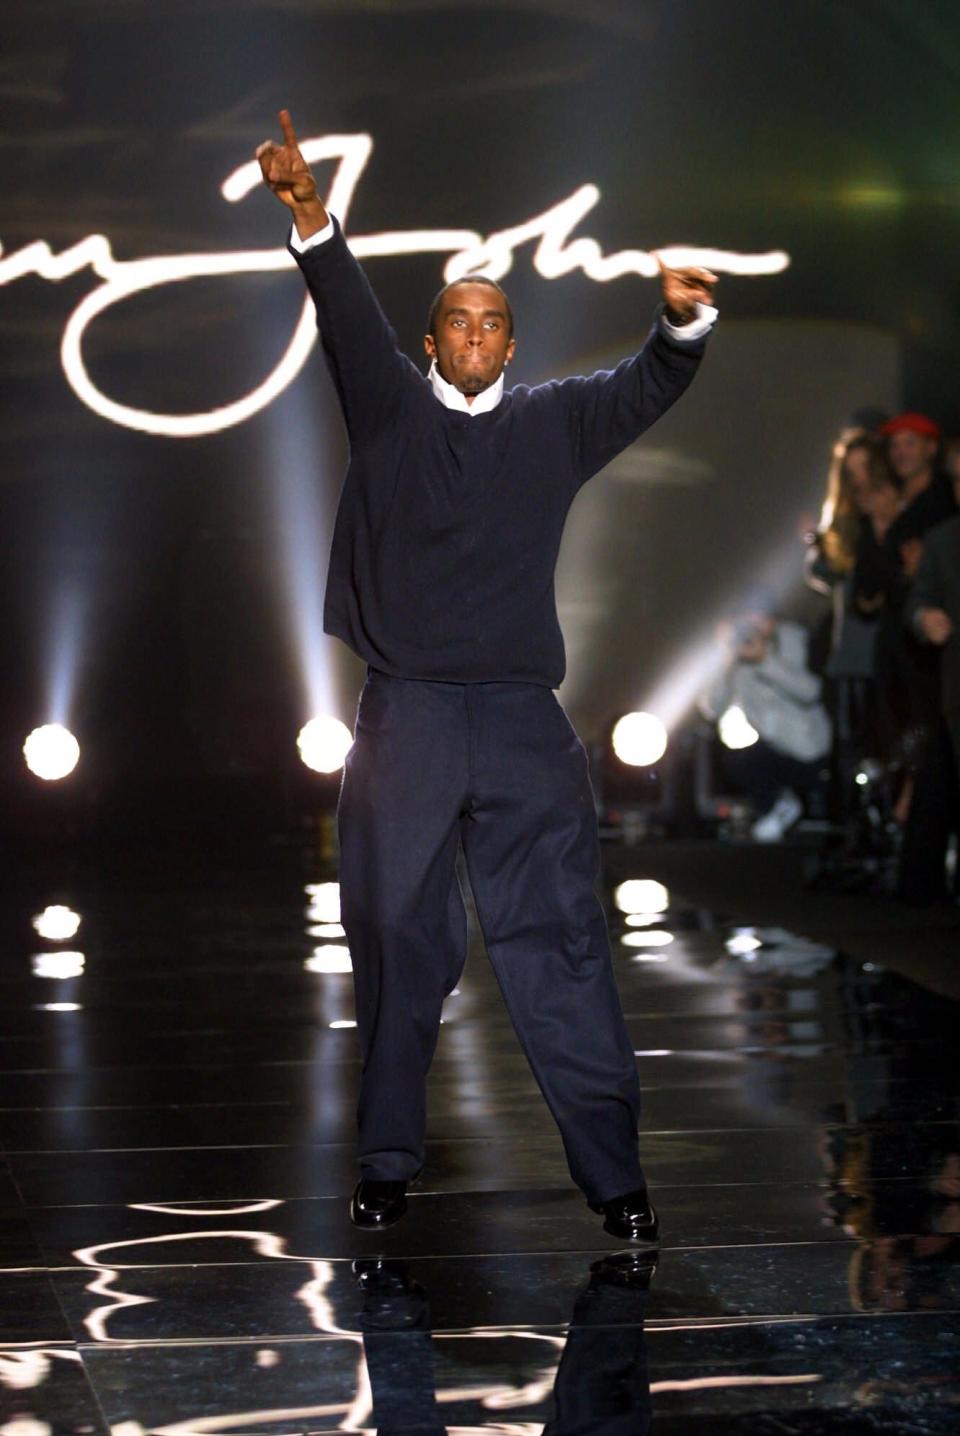 Sean 'Diddy' Combs greets crowd after his Sean John fashion show.